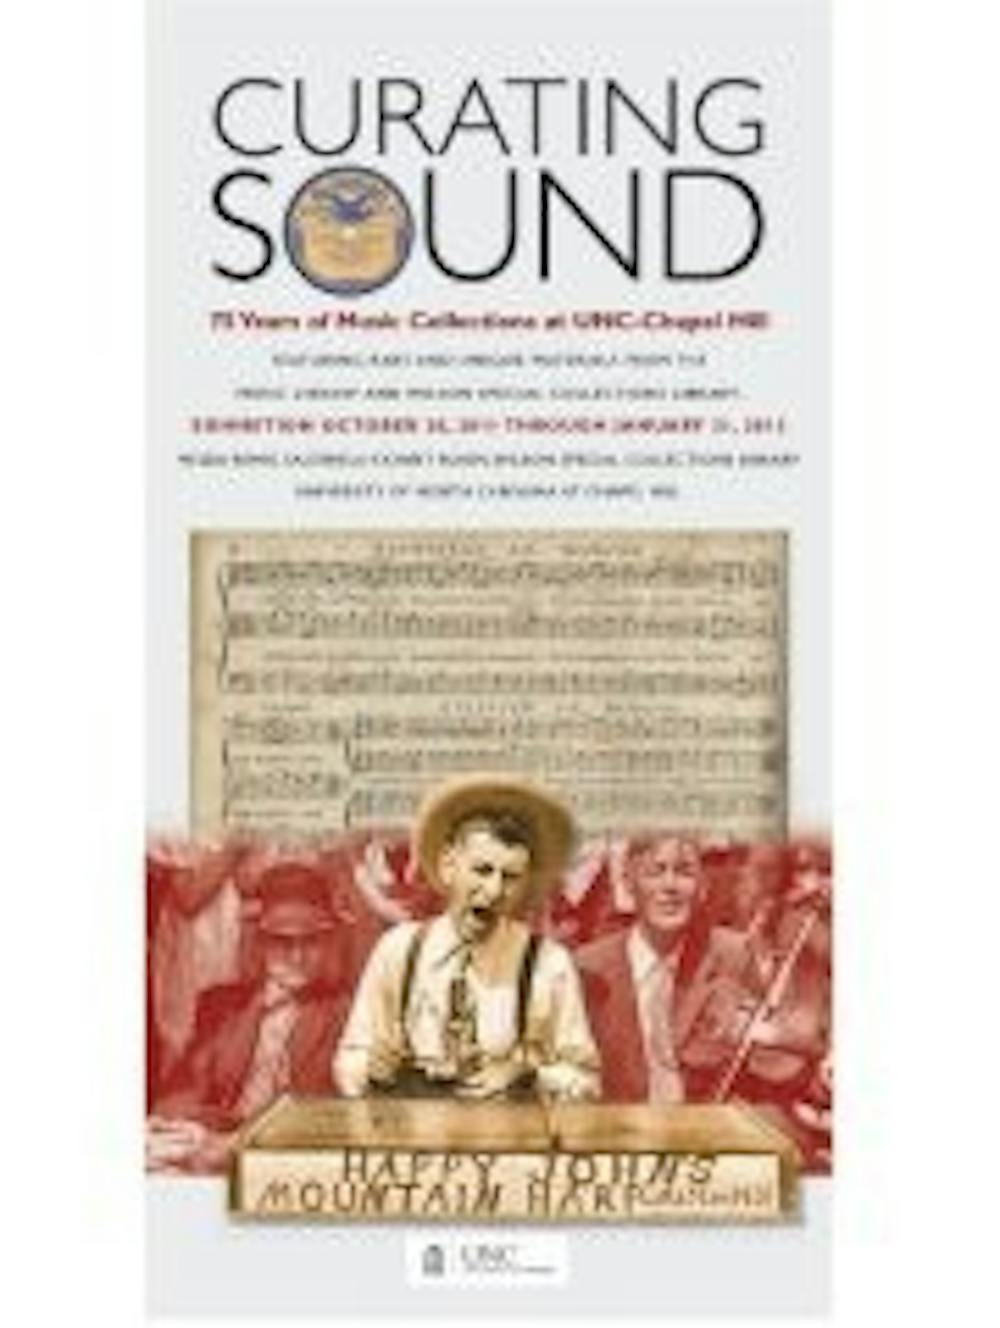 	<p>Promotion poster for Curating Sound: 75 Years of Music Collections at <span class="caps">UNC</span> Chapel Hill</p>